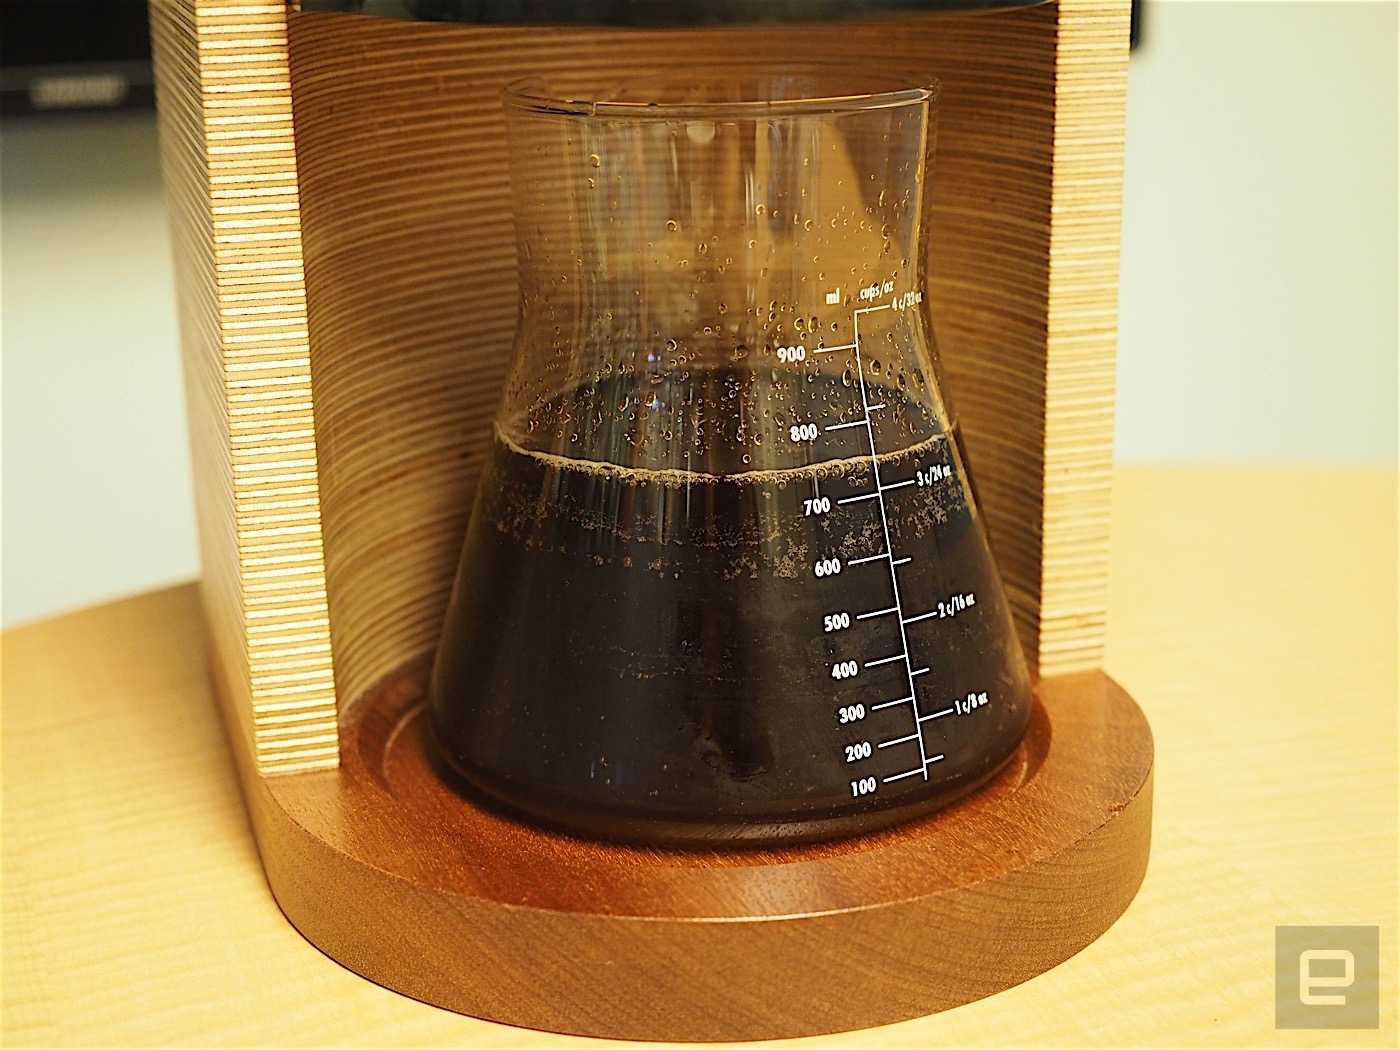 This machine makes cold brew coffee in less than 10 minutes